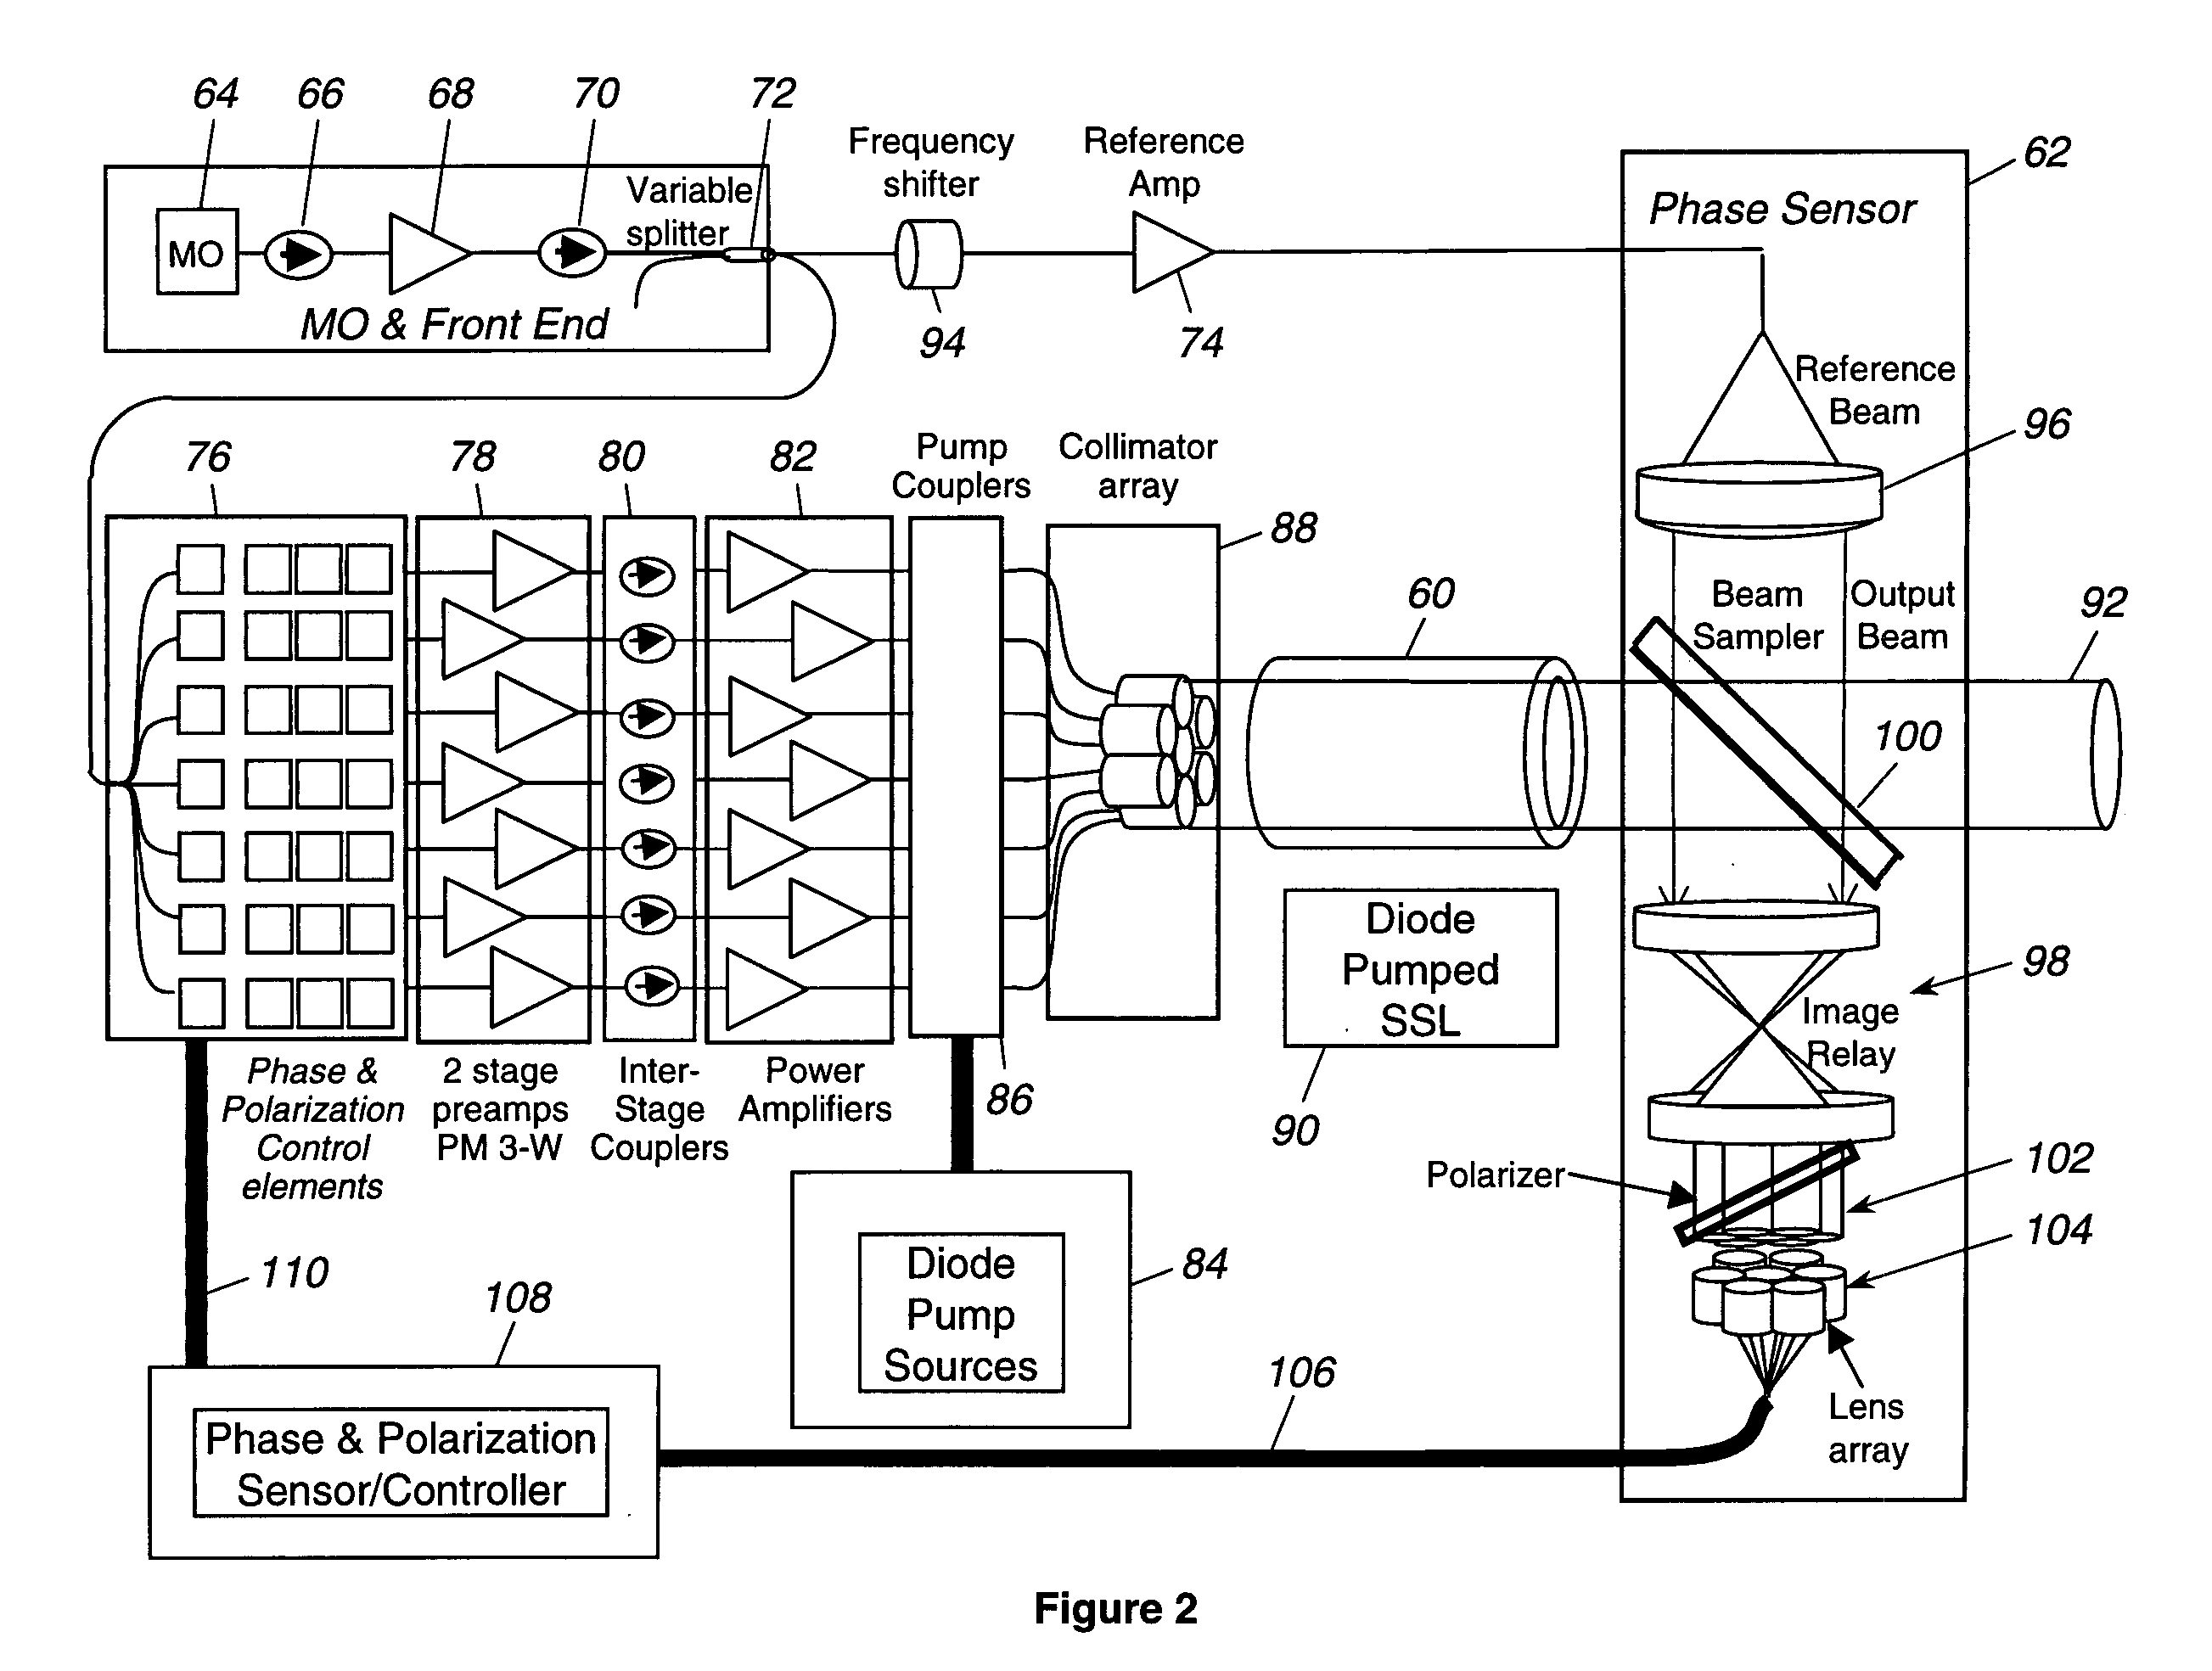 Laser source comprising amplifier and adaptive wavefront/polarization driver